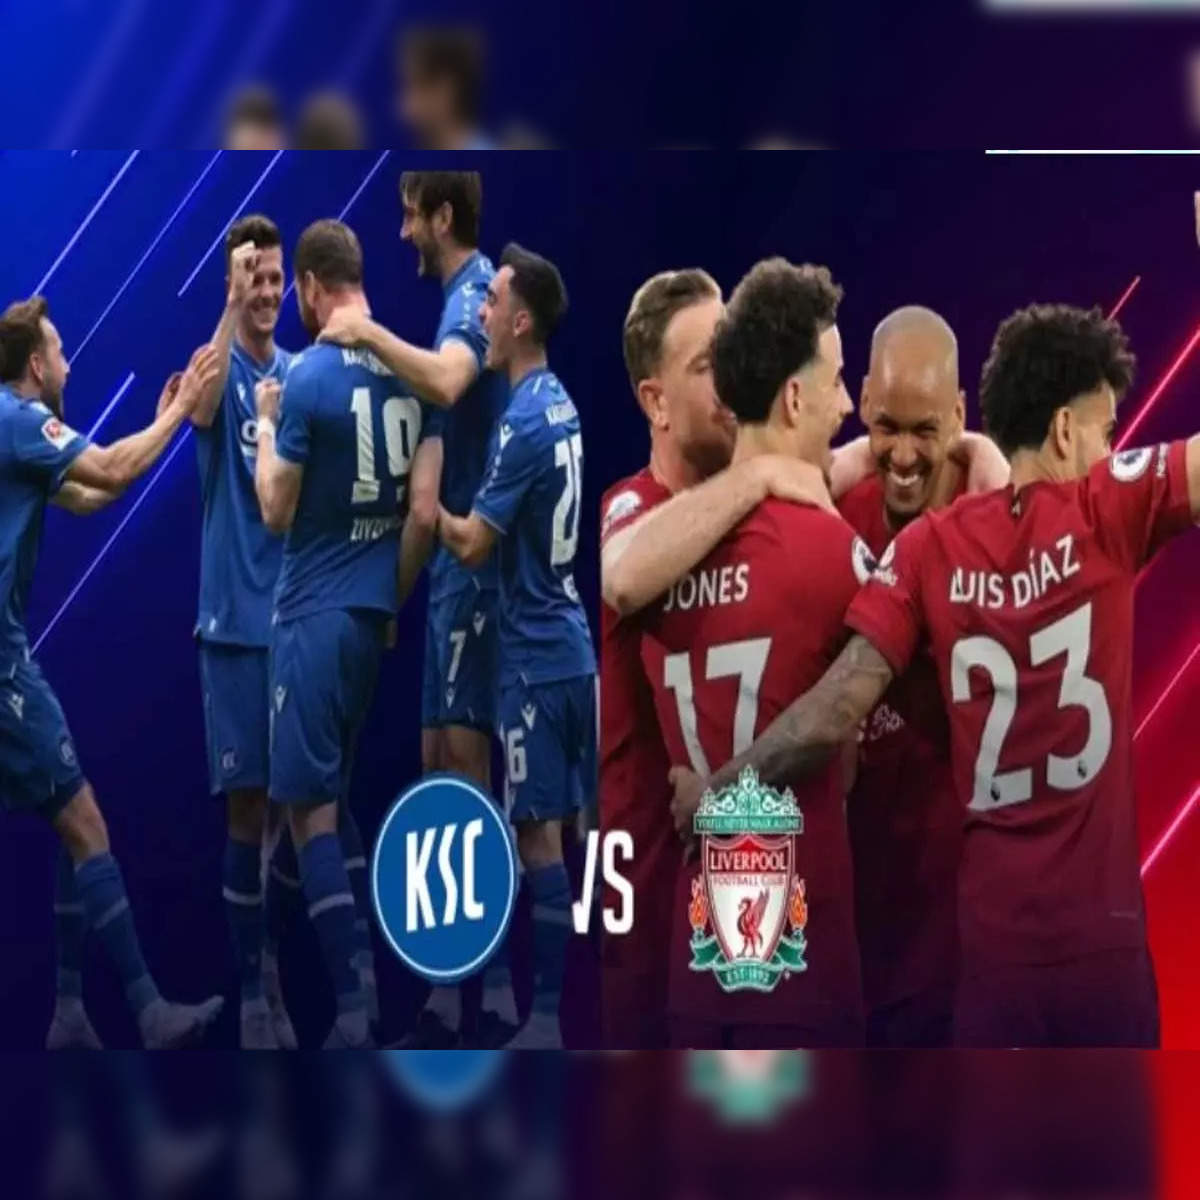 Karlsruher vs Liverpool Liverpool - Karlsruher FC friendly match kick-off time, live streaming, tv, prediction, and team news